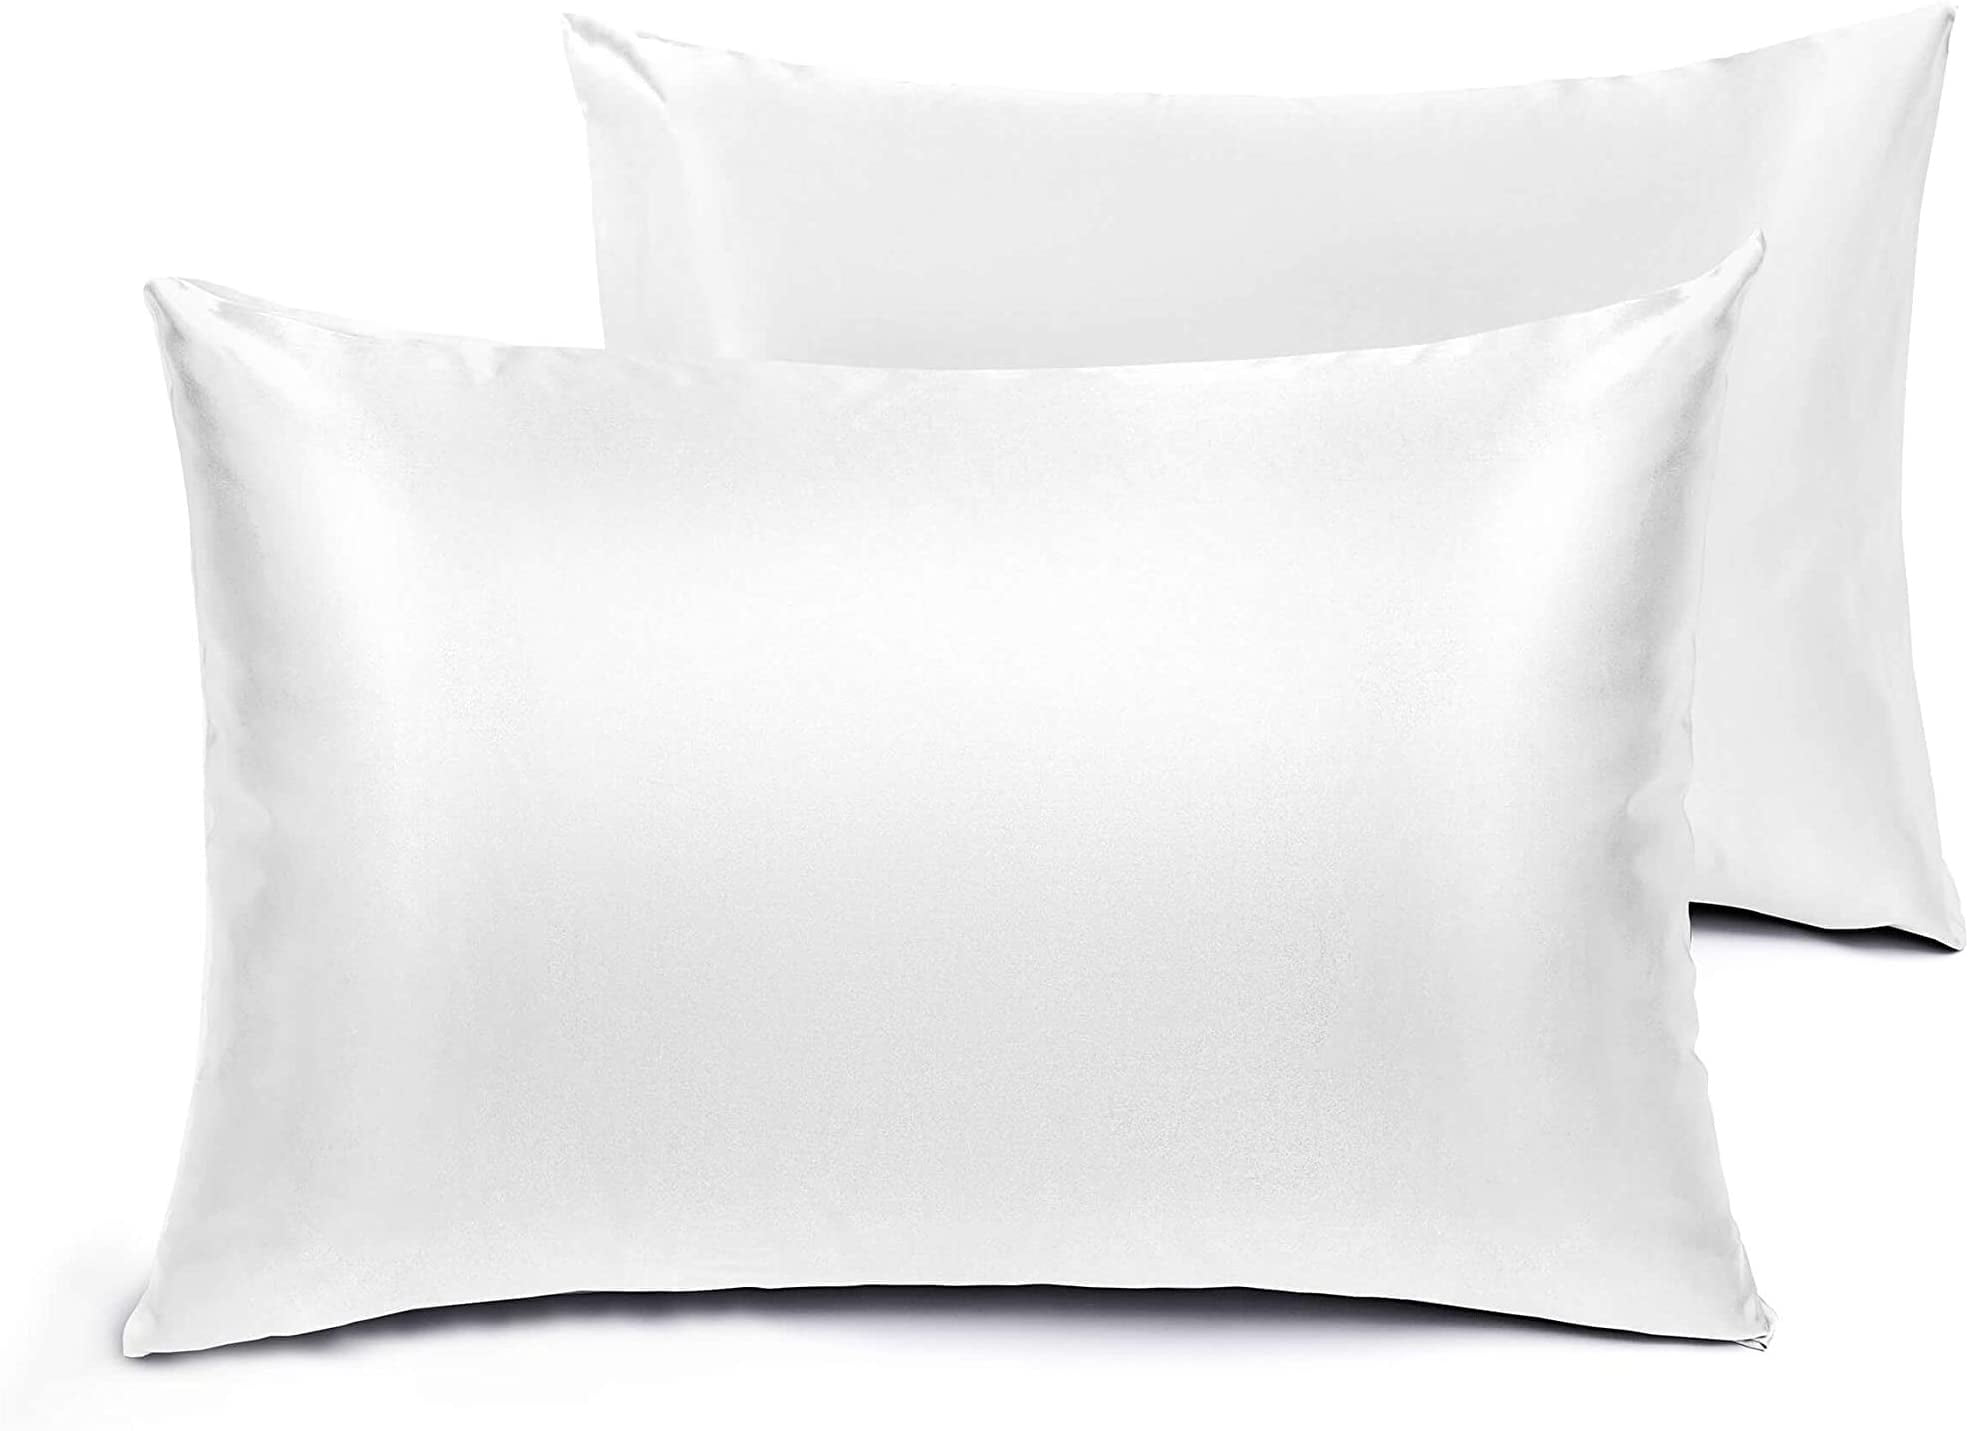 Breathable Pillow Covers for Hair and Details about   downluxe Soft Satin Pillowcase 2 Pack 